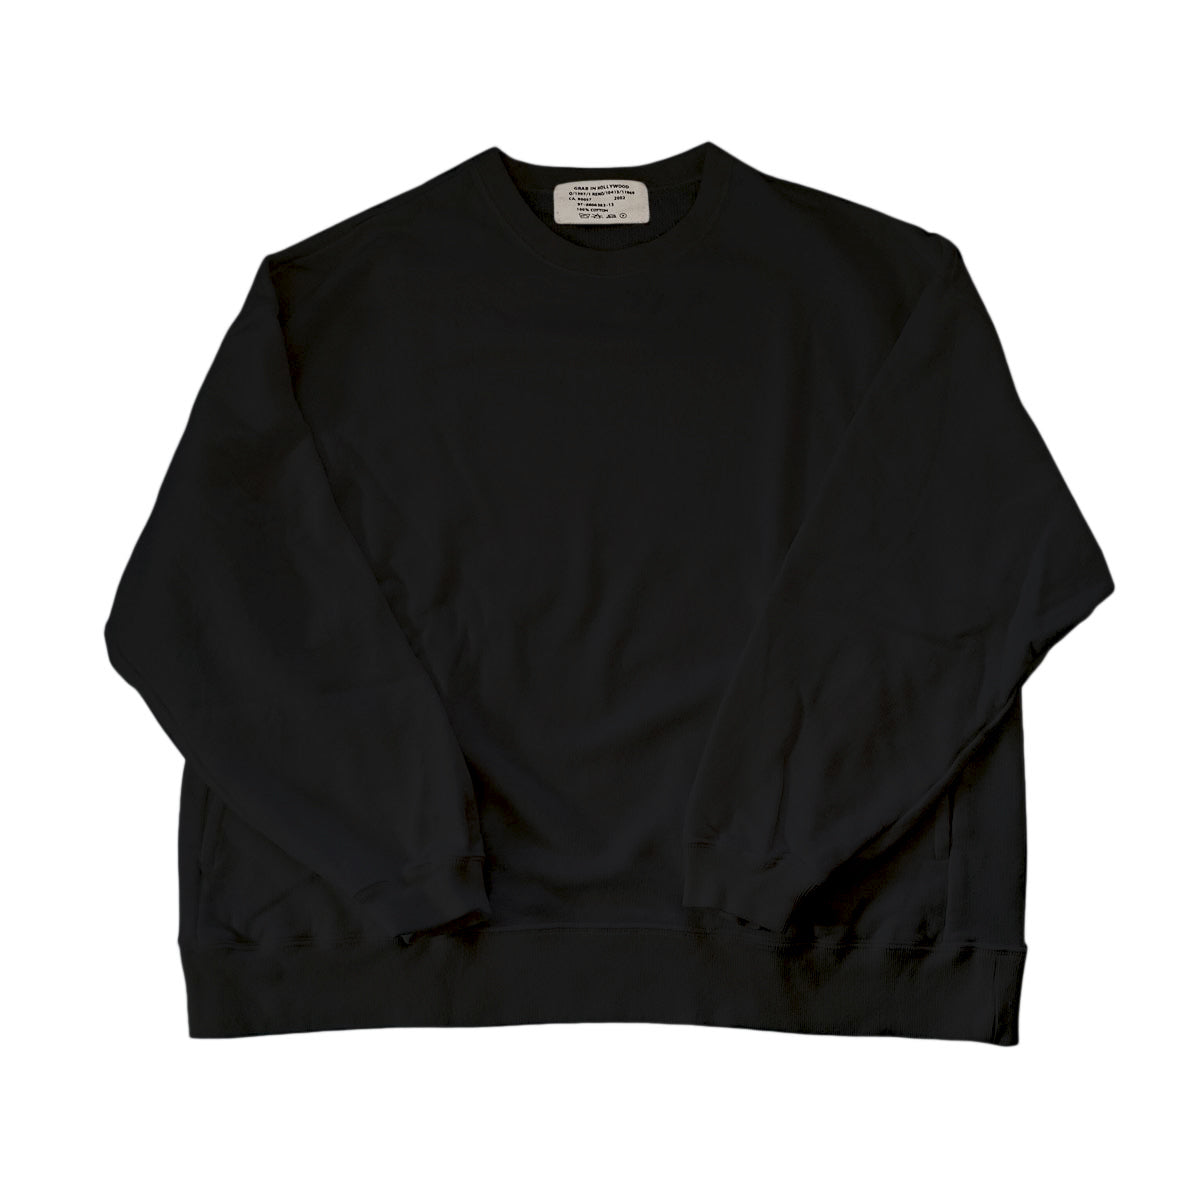 VINTAGE FRENCH TERRY RELAX CREW L/S[ビンテージフレンチテリー リラックスクルー長袖]BLK